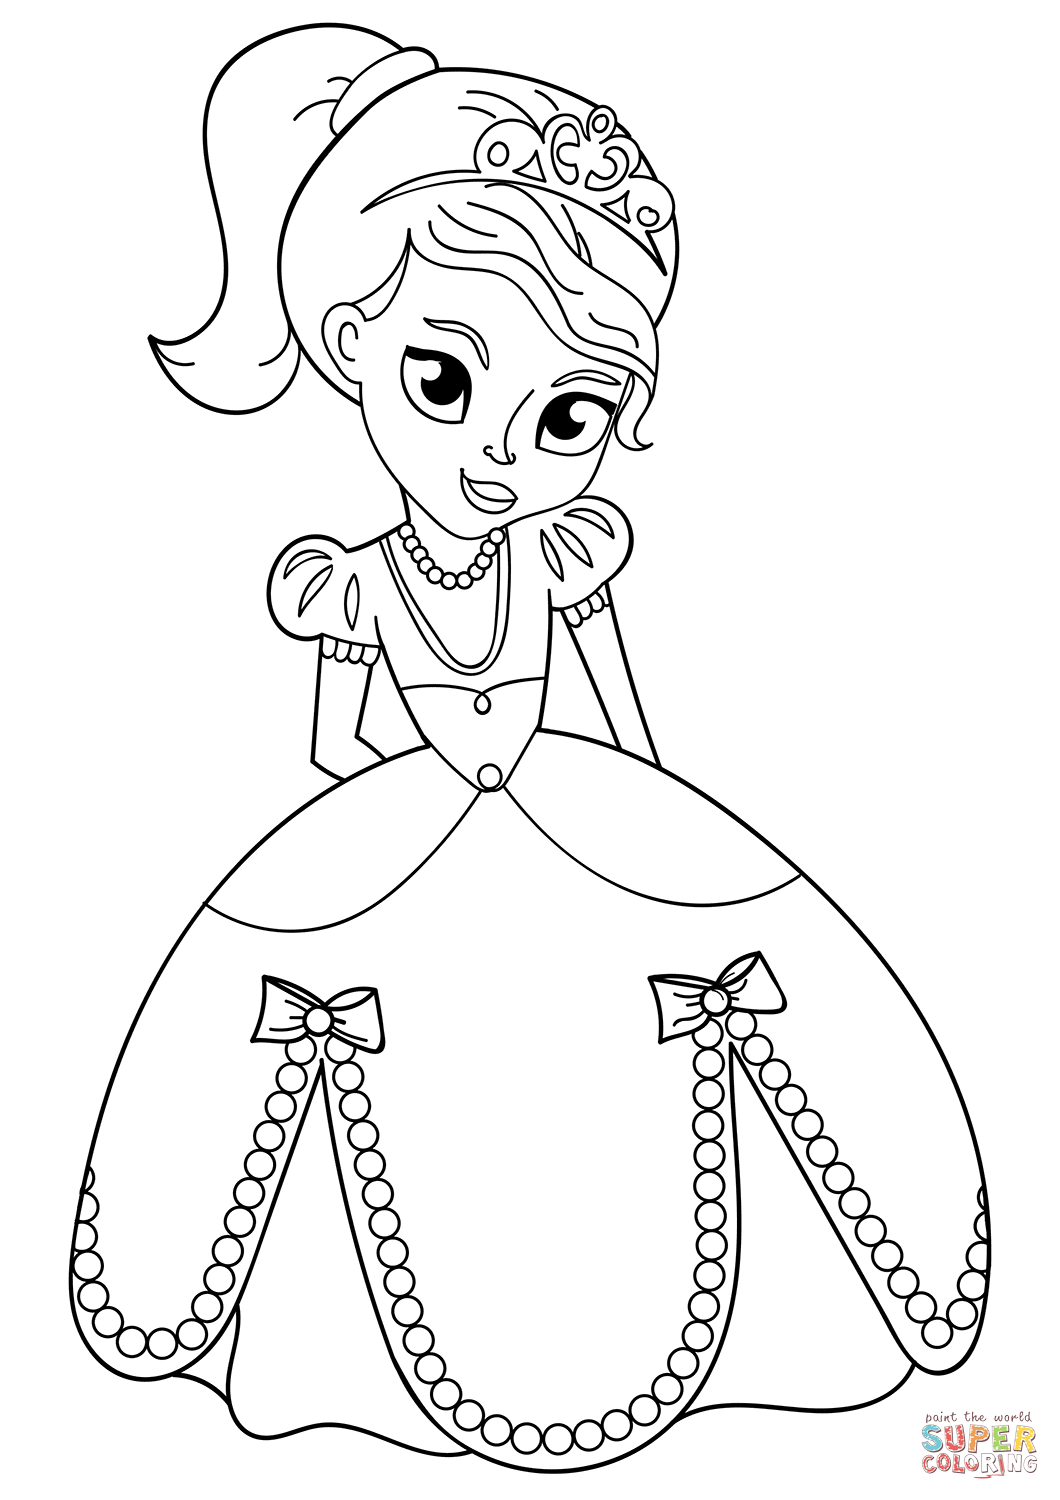 Cute Princess coloring page | Free Printable Coloring Pages